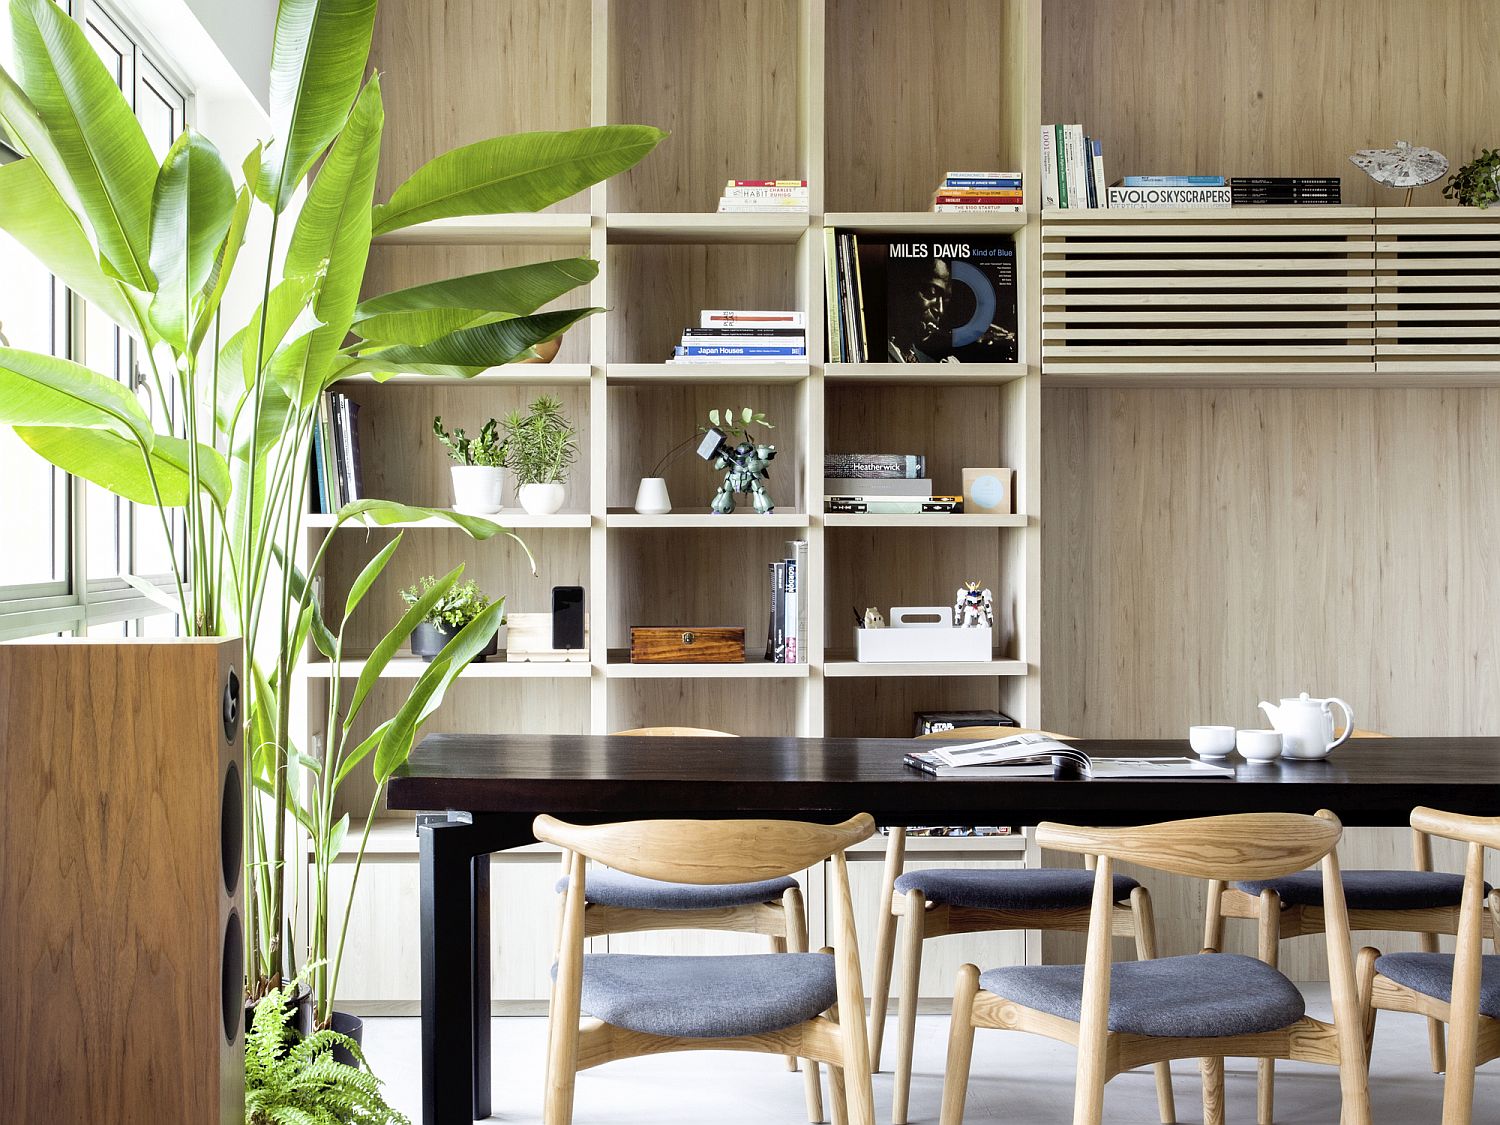 Wooden partitions and shelving inside the apartment